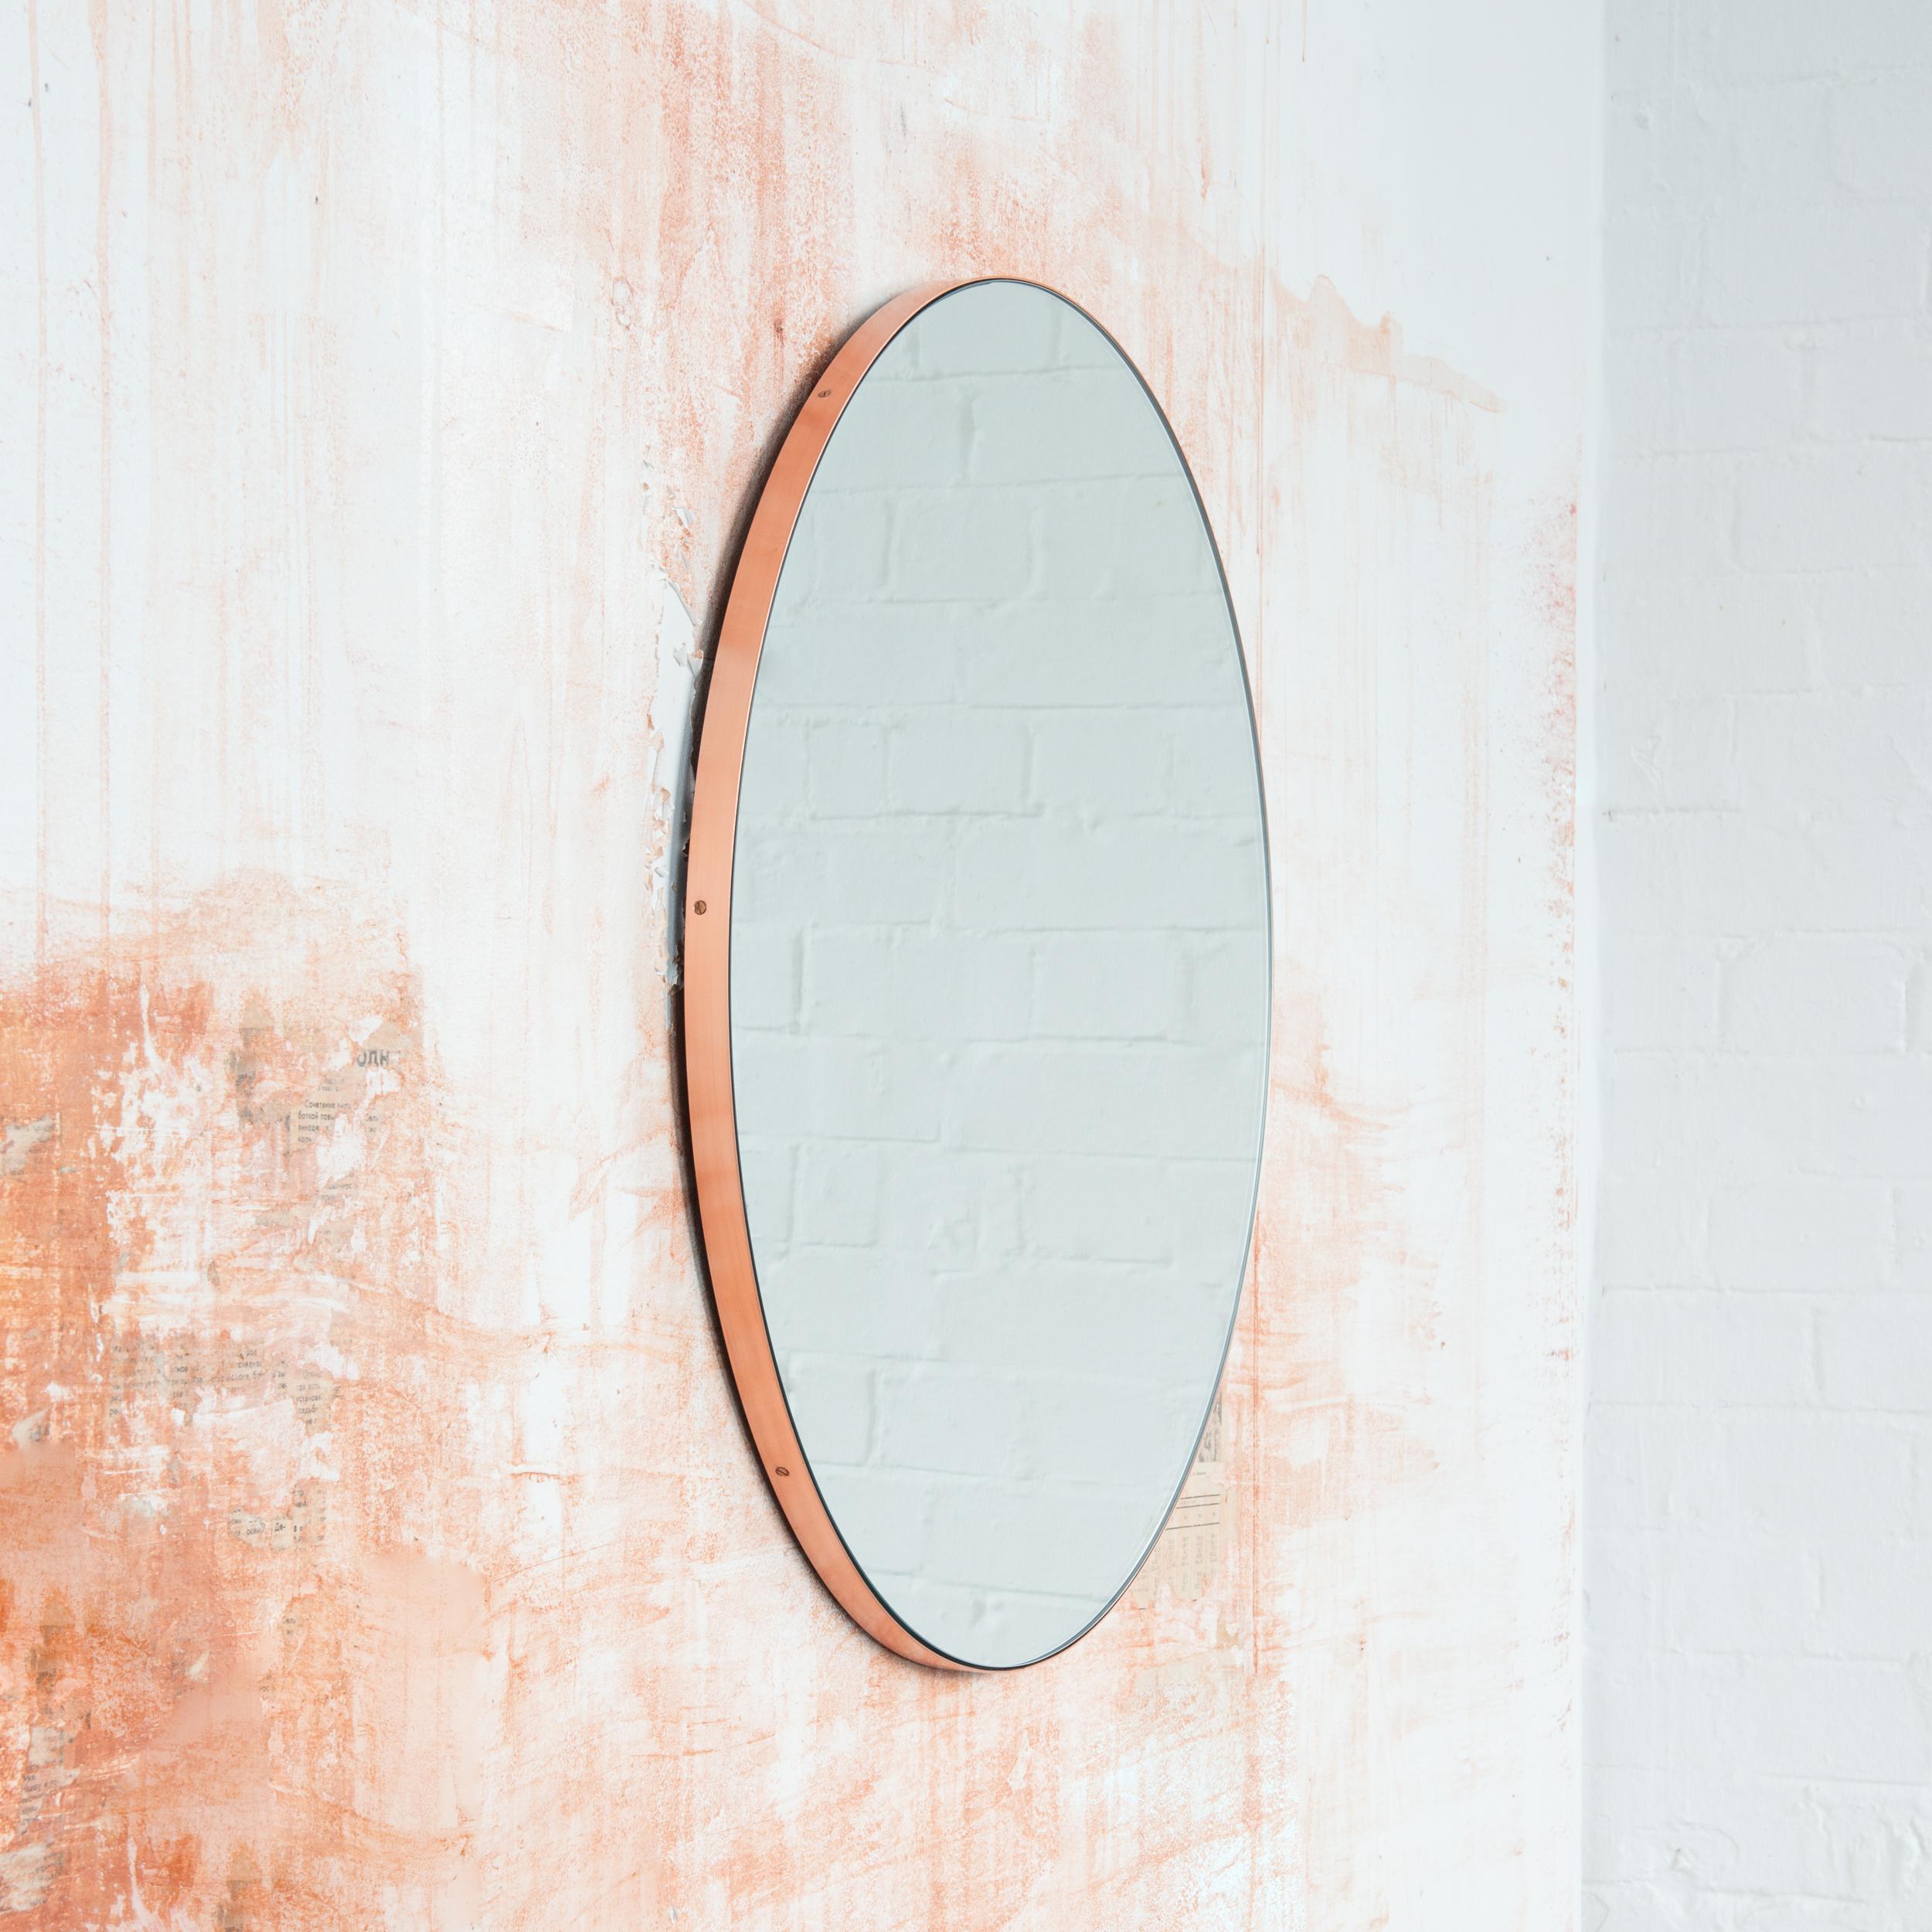 Minimalist Orbis Round Contemporary Mirror with Brushed Copper Frame, XL For Sale